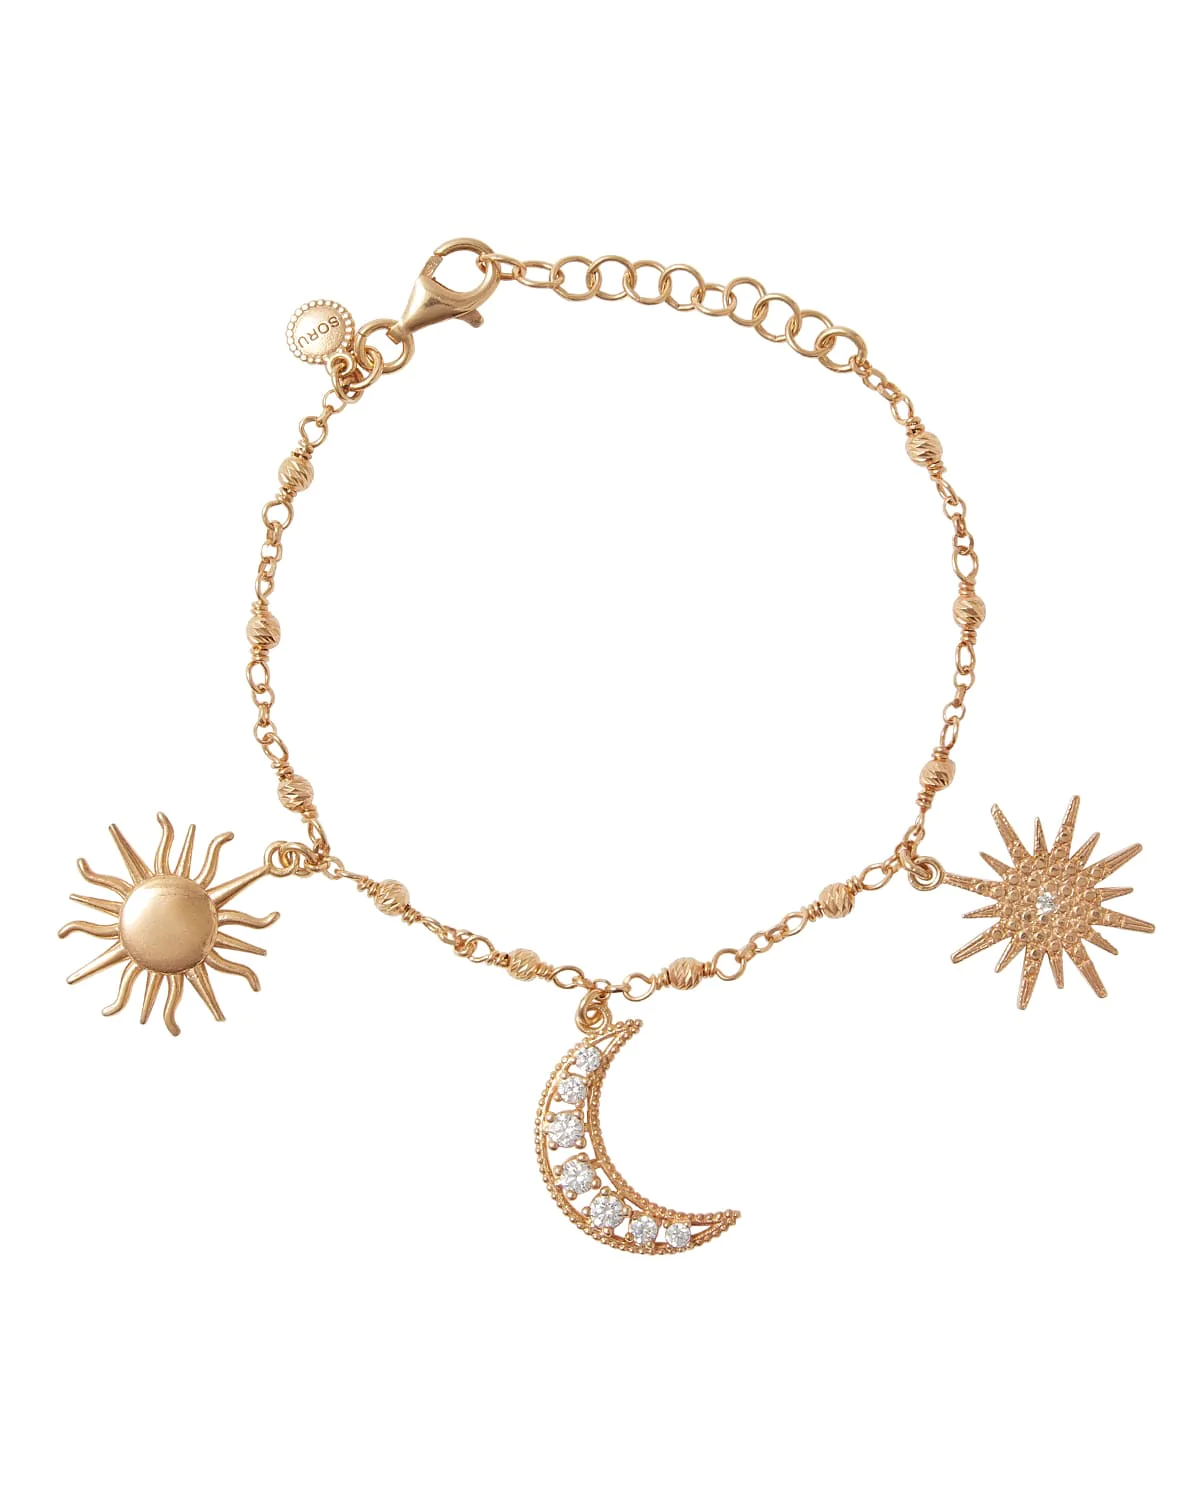 Soru Jewellery Celestial Charm bracelet, beaded chain bracelet featuring 3 fixed charms24ct gold plated solid silver and Swarovski crystals